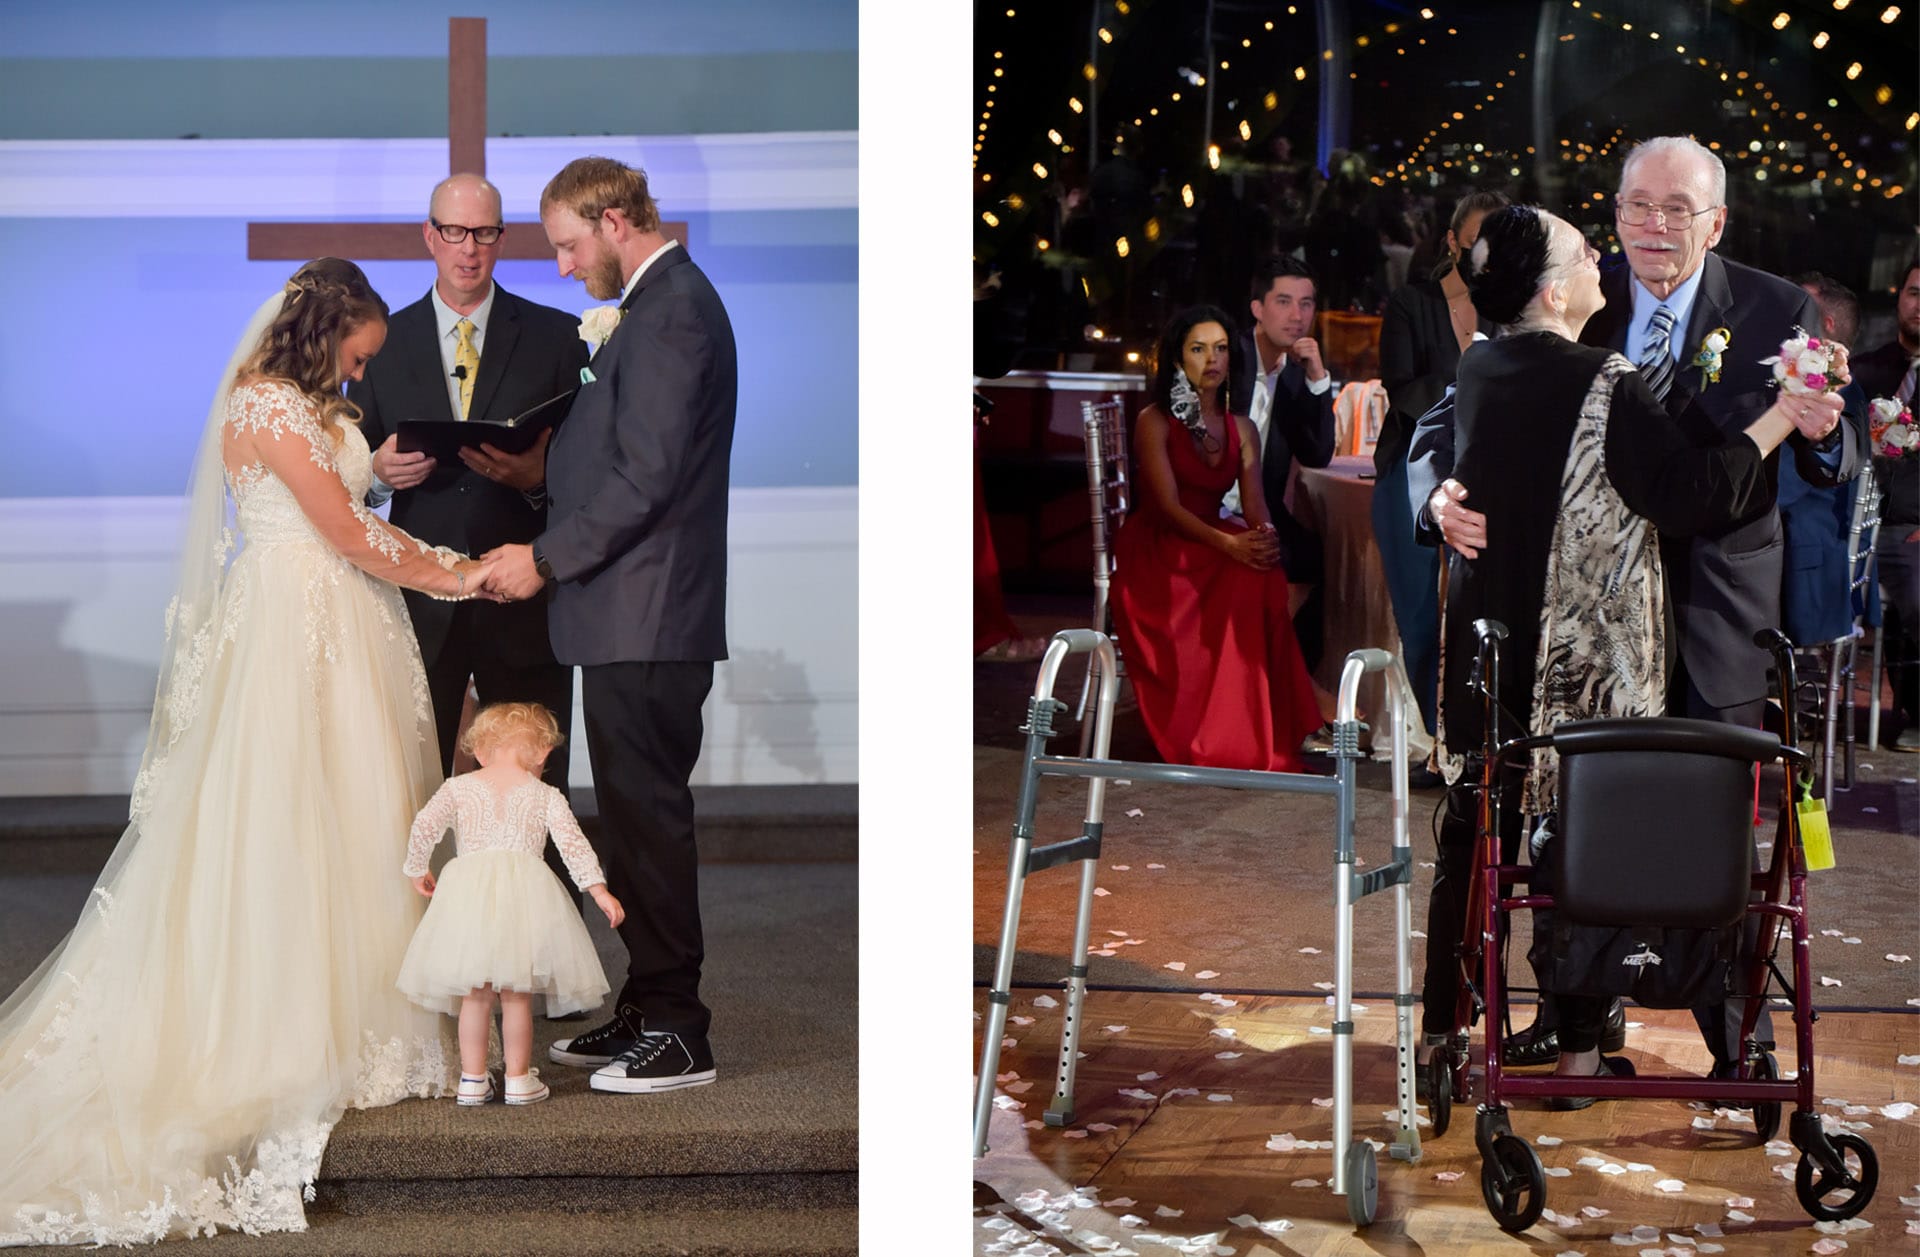 The couple's two year old daughter stands at the alter with her parents and bows her head right on cue during their Macomb, Michigan wedding and a couple celebrating 60 years dances with their walkers during the anniversary dance at The Roostertail wedding venue in Detroit, Michigan.